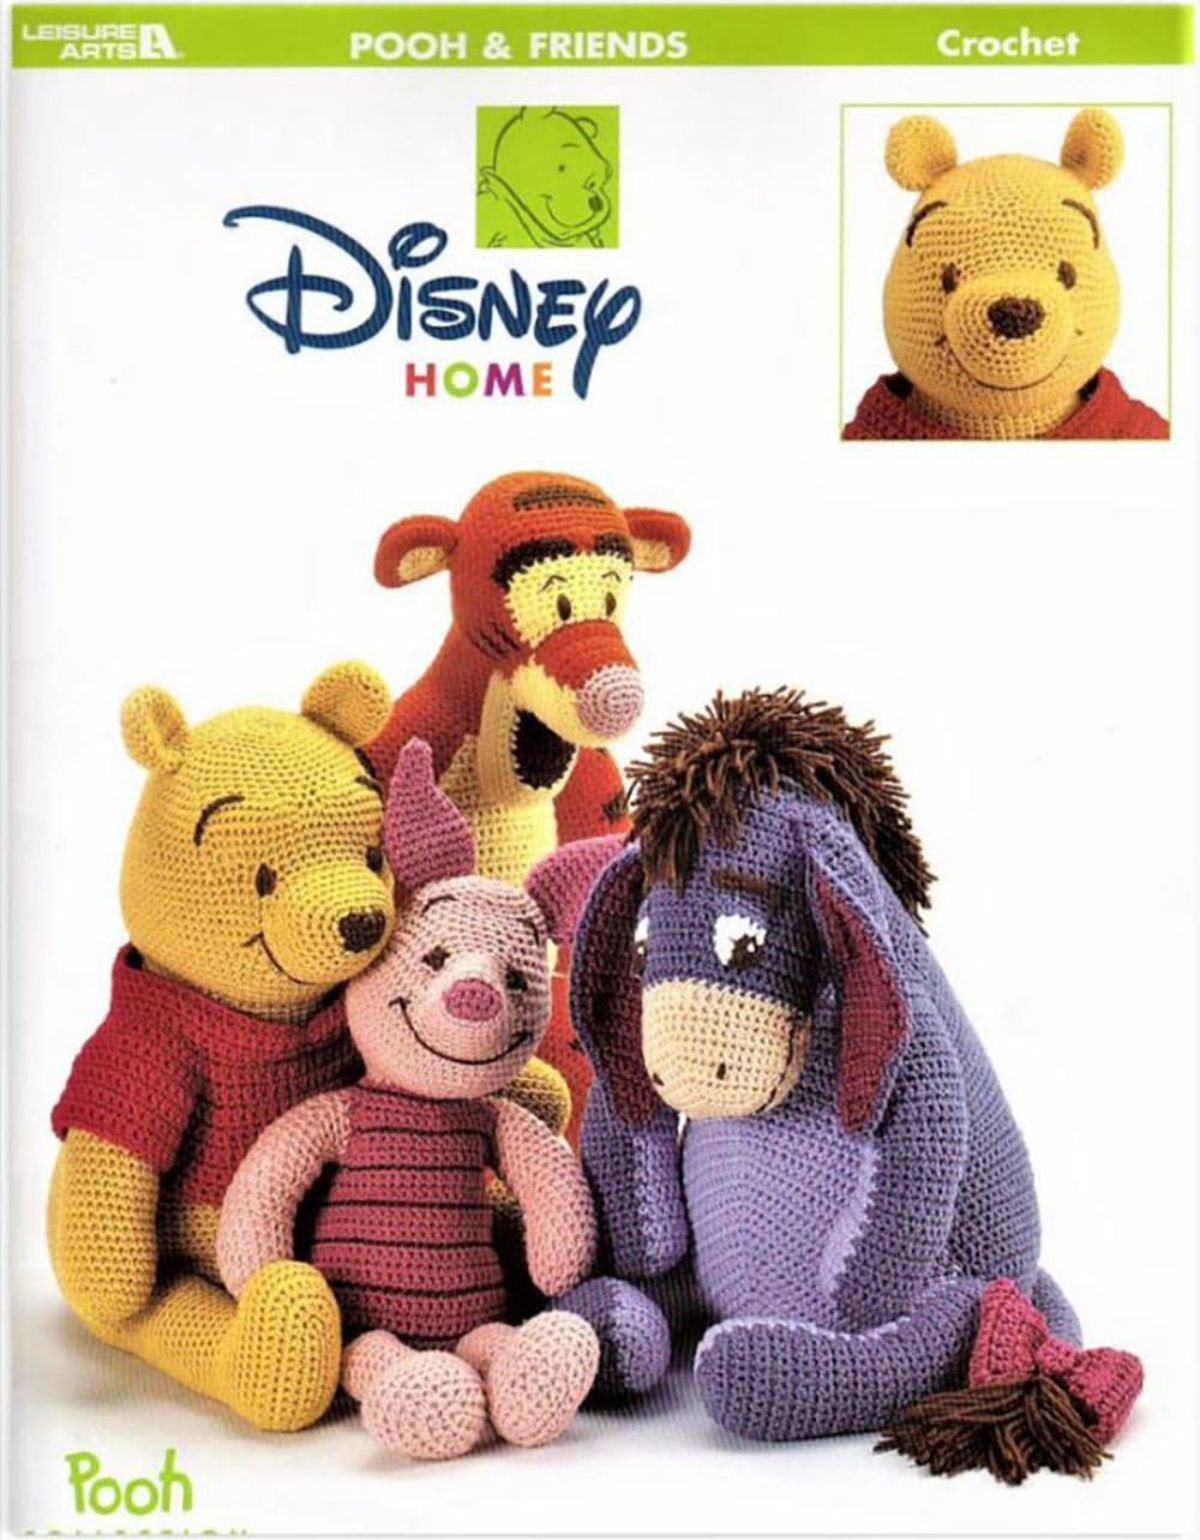 A Crochet Winnie the Pooh, Piglet, Eeyore, and Tigger sit together on a white background with the Disney logo above their heads. 